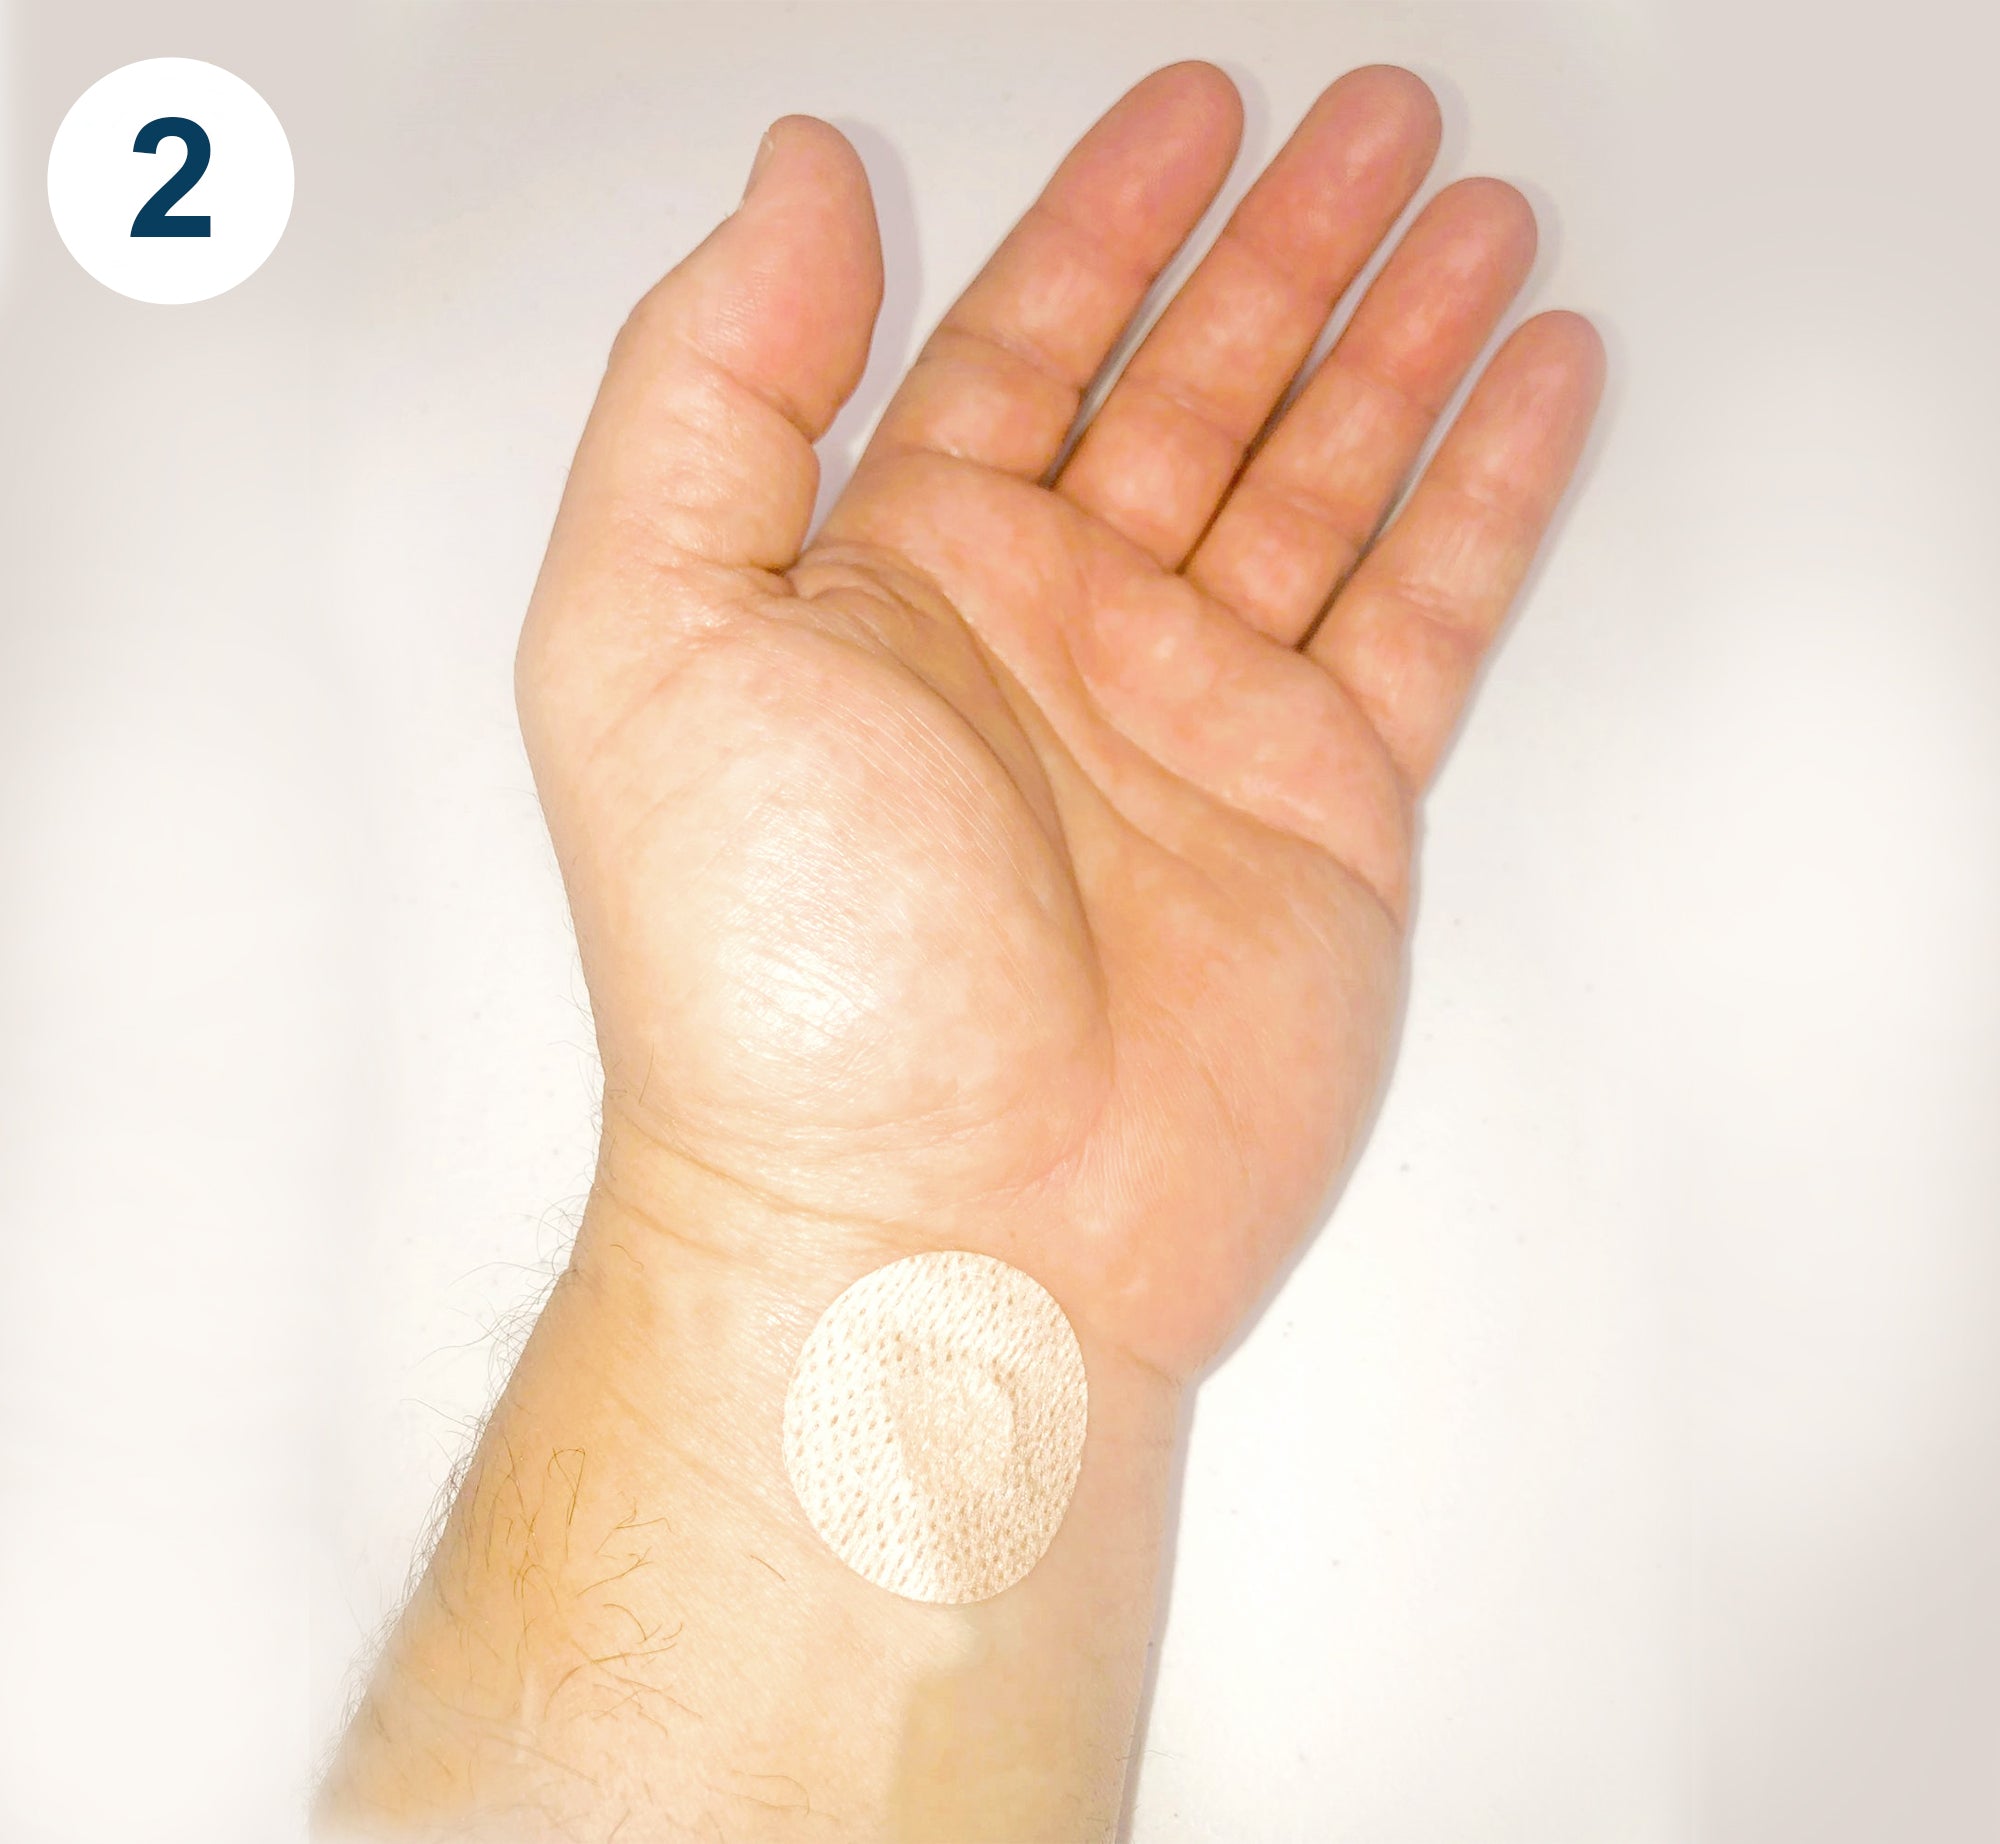 thumbs and index fingers from both hands are used to peel the adhesive from the patch